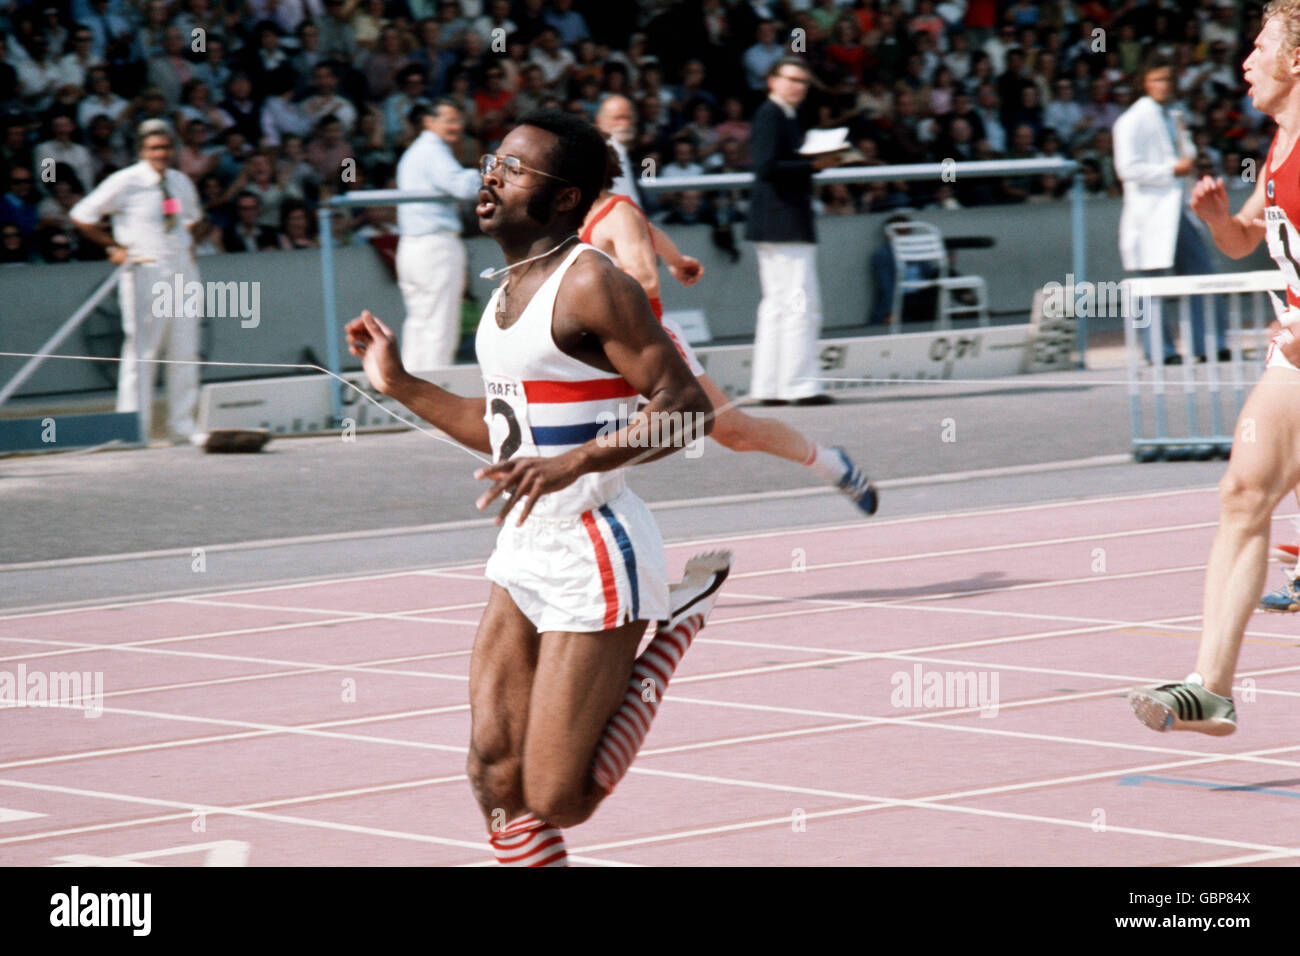 Athletics - Great Britain v USSR. Great Britain's Ainsley Bennett crosses the line to win the men's 200m Stock Photo